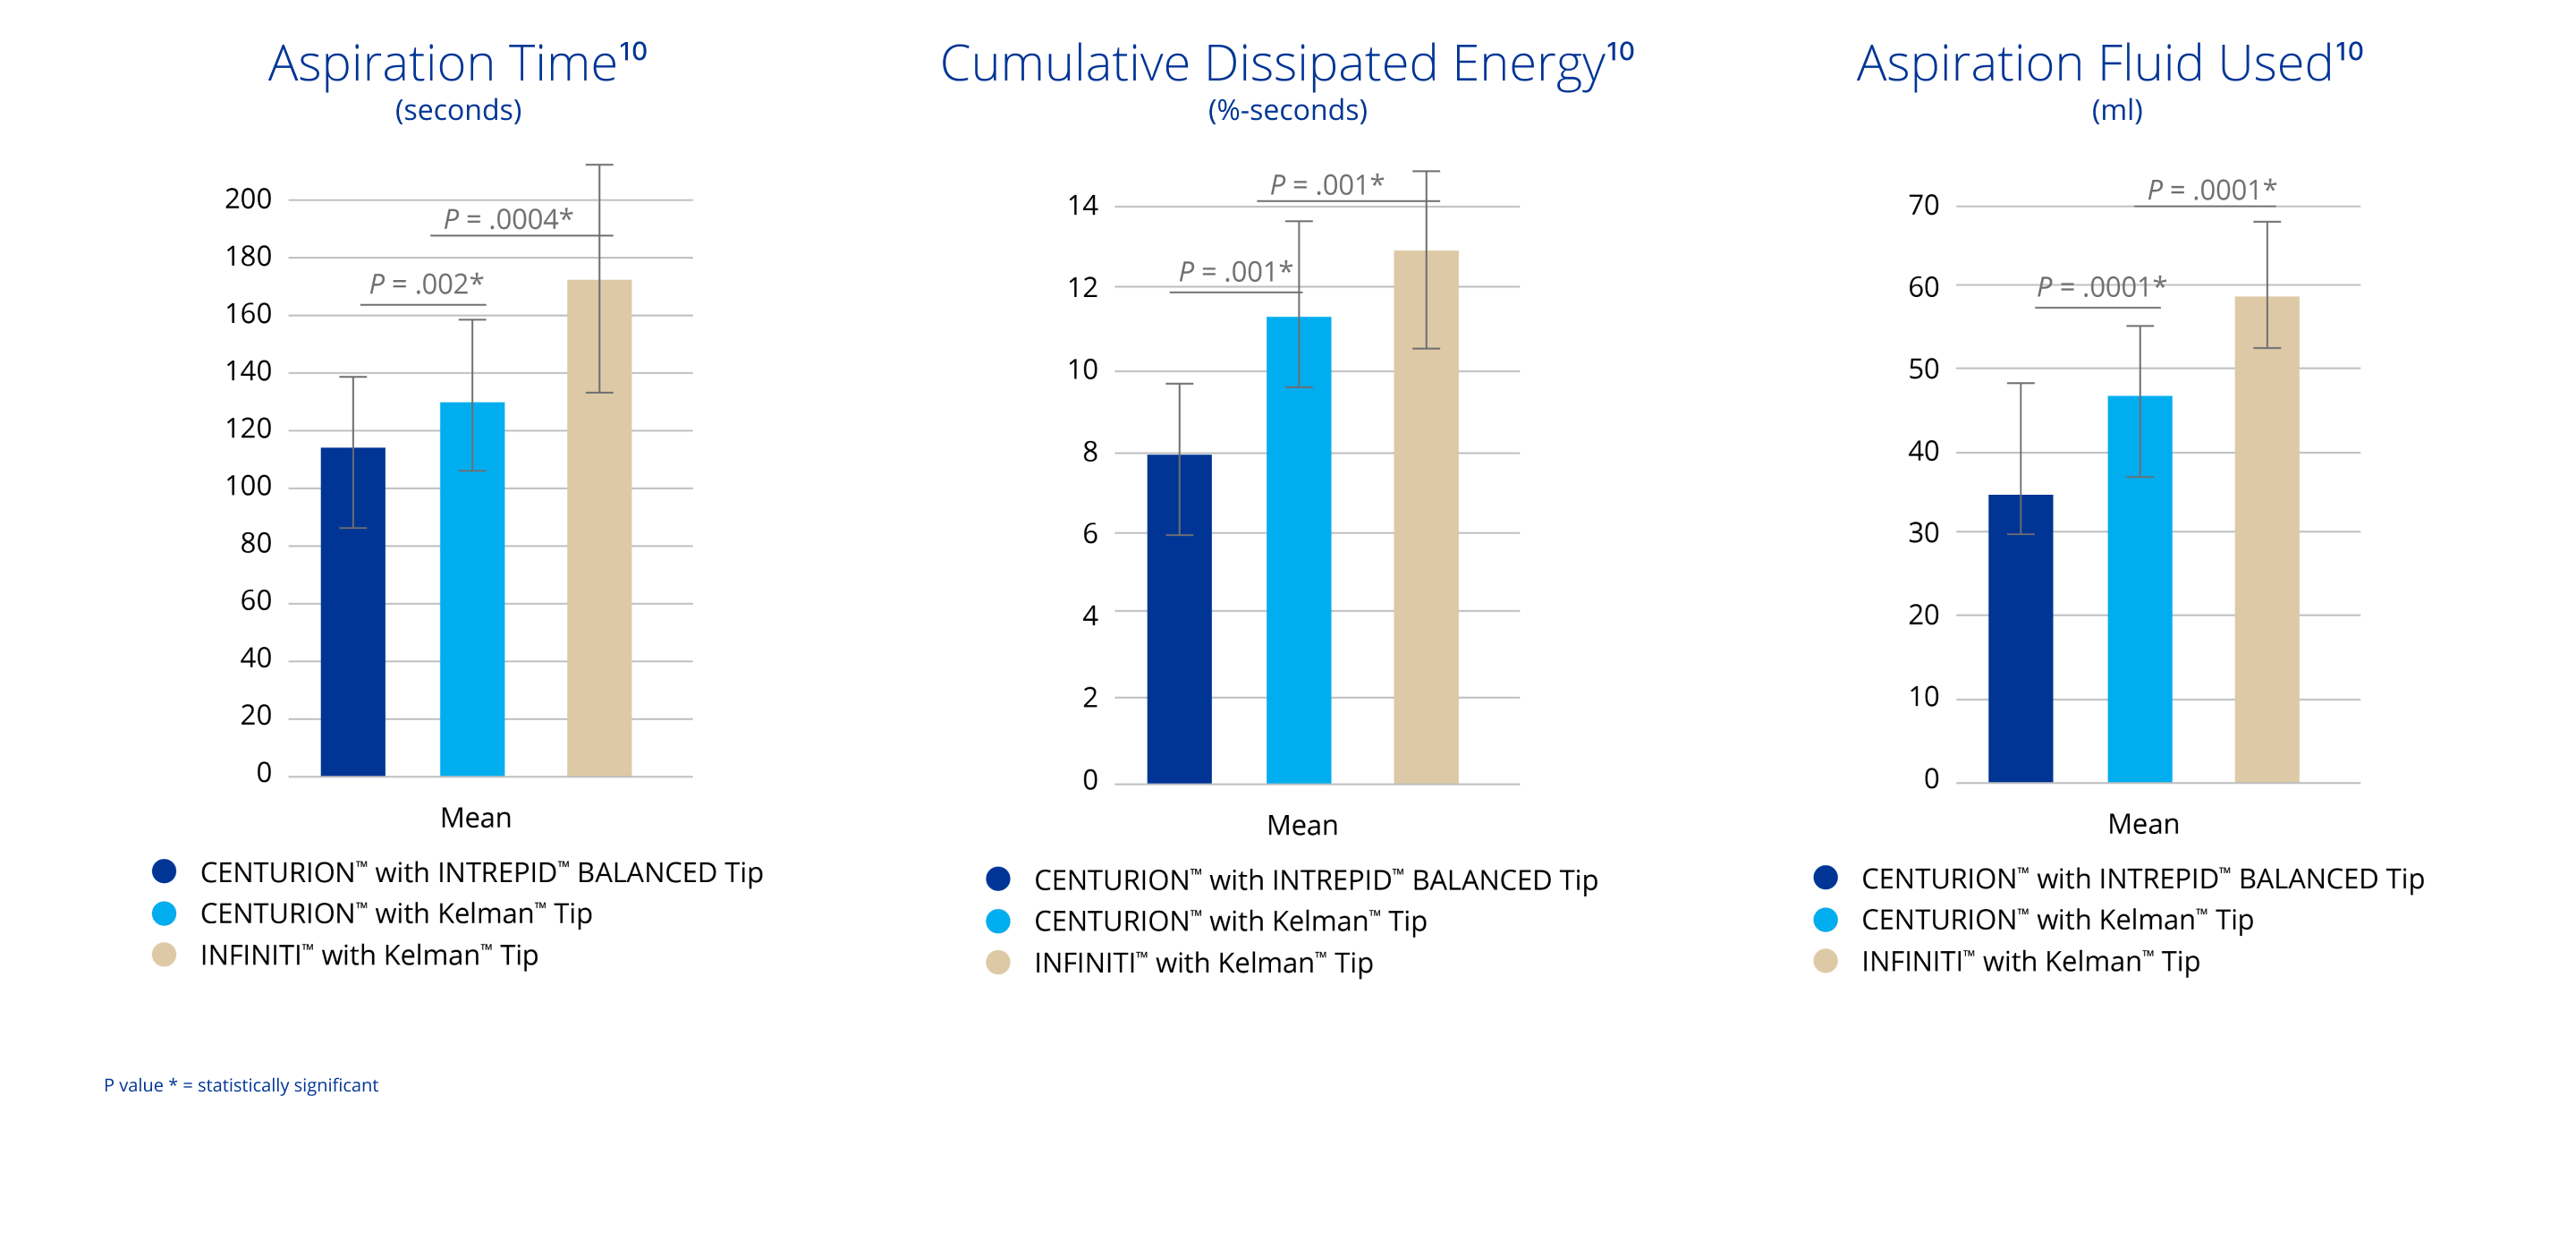 A bar graph comparing aspiration time measured in seconds between the CENTURION with INTREPID BALANCED Tip, CENTURION with Kelman Tip and INFINITI with Kelman Tip. CENTURION with INTREPID BALANCED Tip had a significantly lower aspiration time than CENTURION with Kelman Tip and INFINITI with Kelman Tip. A bar graph comparing cumulative dissipated energy between the CENTURION with INTREPID BALANCED Tip, CENTURION with Kelman Tip and INFINITI with Kelman Tip. CENTURION with INTREPID BALANCED Tip had significantly lower cumulative dissipated energy than CENTURION with Kelman Tip and INFINITI with Kelman Tip. A bar graph comparing aspiration fluid used with the CENTURION with INTREPID BALANCED Tip, CENTURION with Kelman Tip and INFINITI with Kelman Tip. CENTURION with INTREPID BALANCED Tip used significantly less aspiration fluid than CENTURION with Kelman Tip and INFINITI with Kelman Tip.